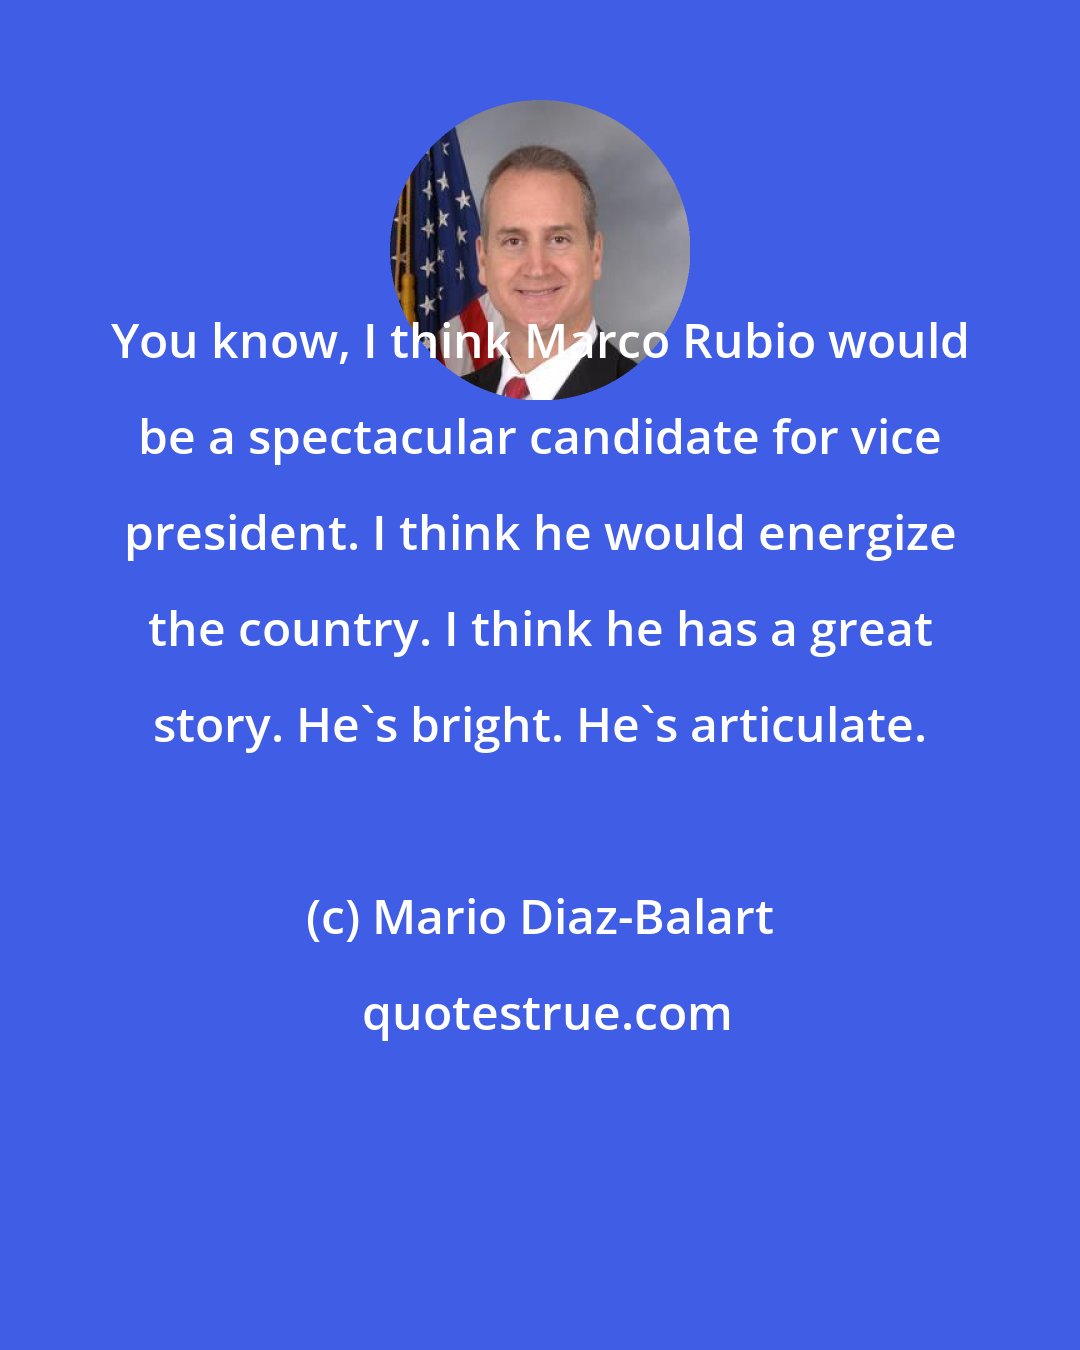 Mario Diaz-Balart: You know, I think Marco Rubio would be a spectacular candidate for vice president. I think he would energize the country. I think he has a great story. He's bright. He's articulate.